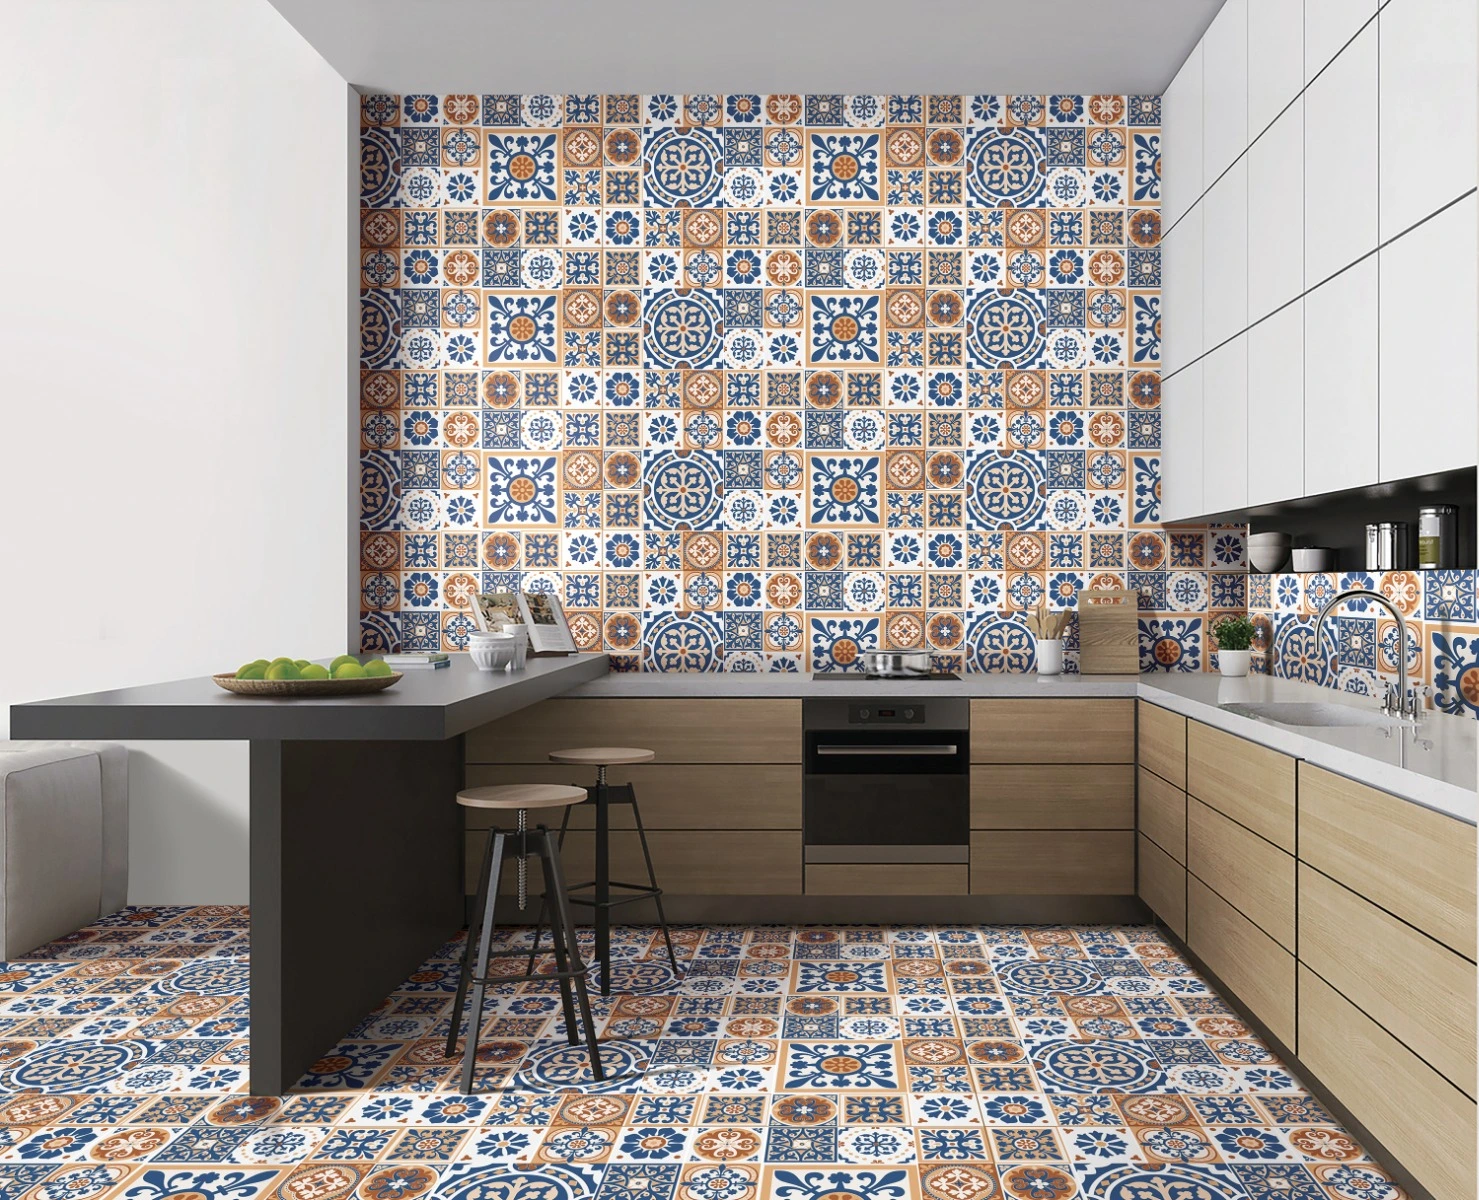 Where Can We Use Morocco Tiles? | Complete Guide